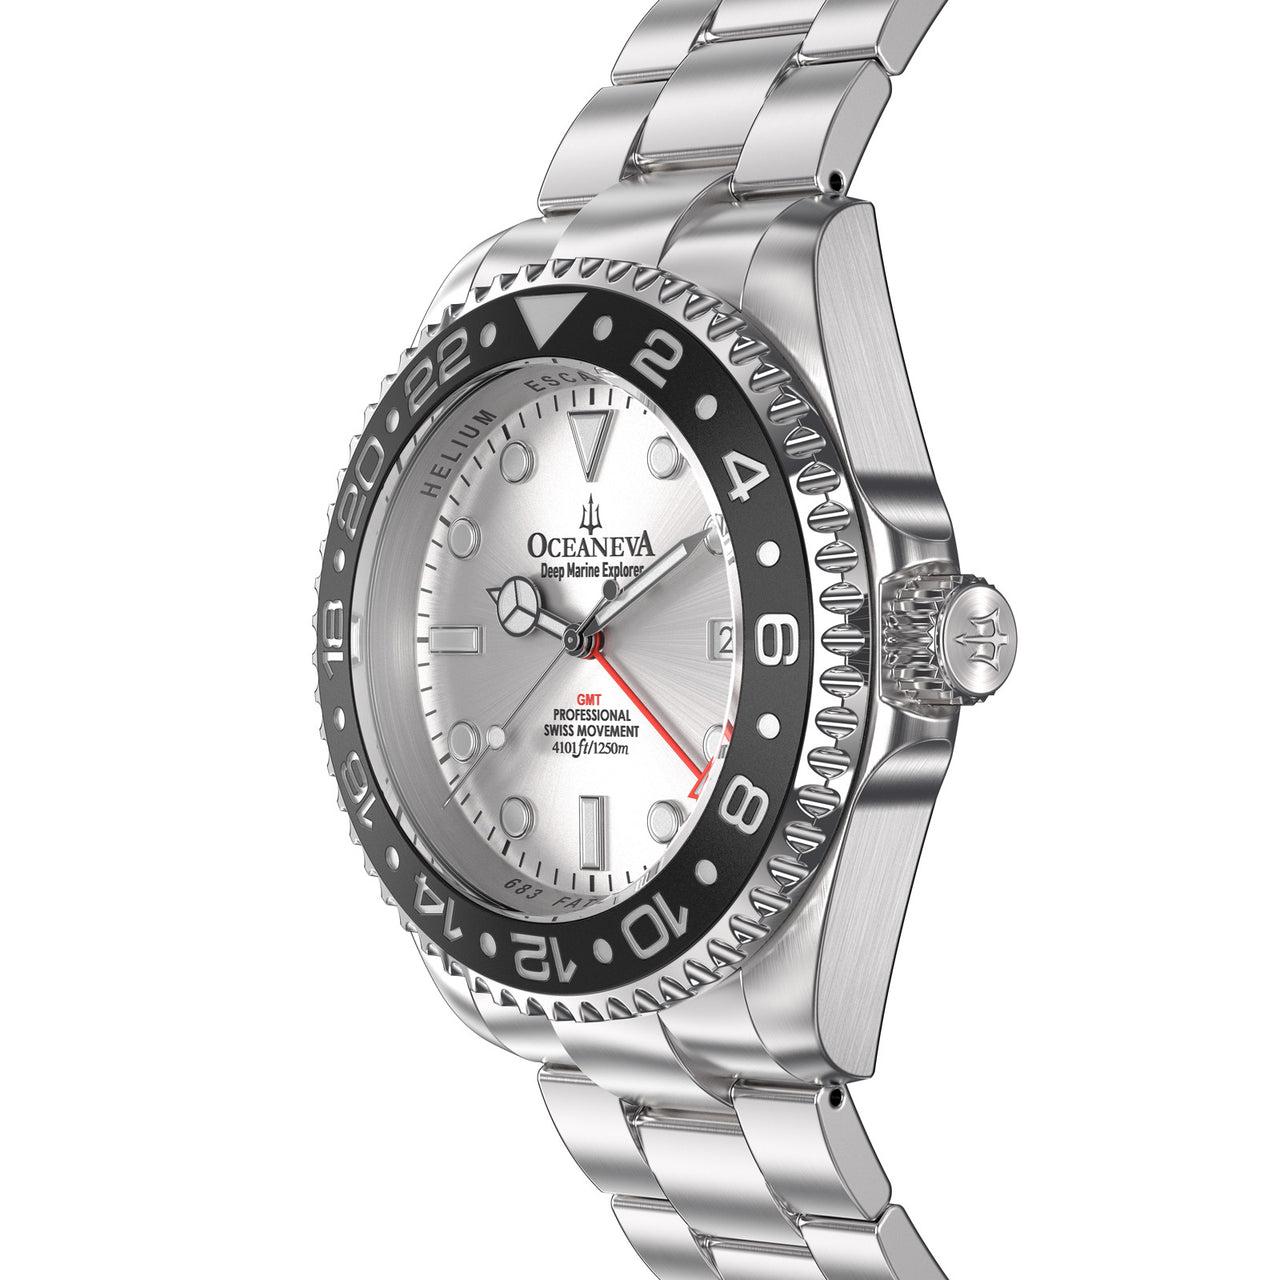 Oceaneva 1250M GMT Dive Watch Silver And Black Side View Crown